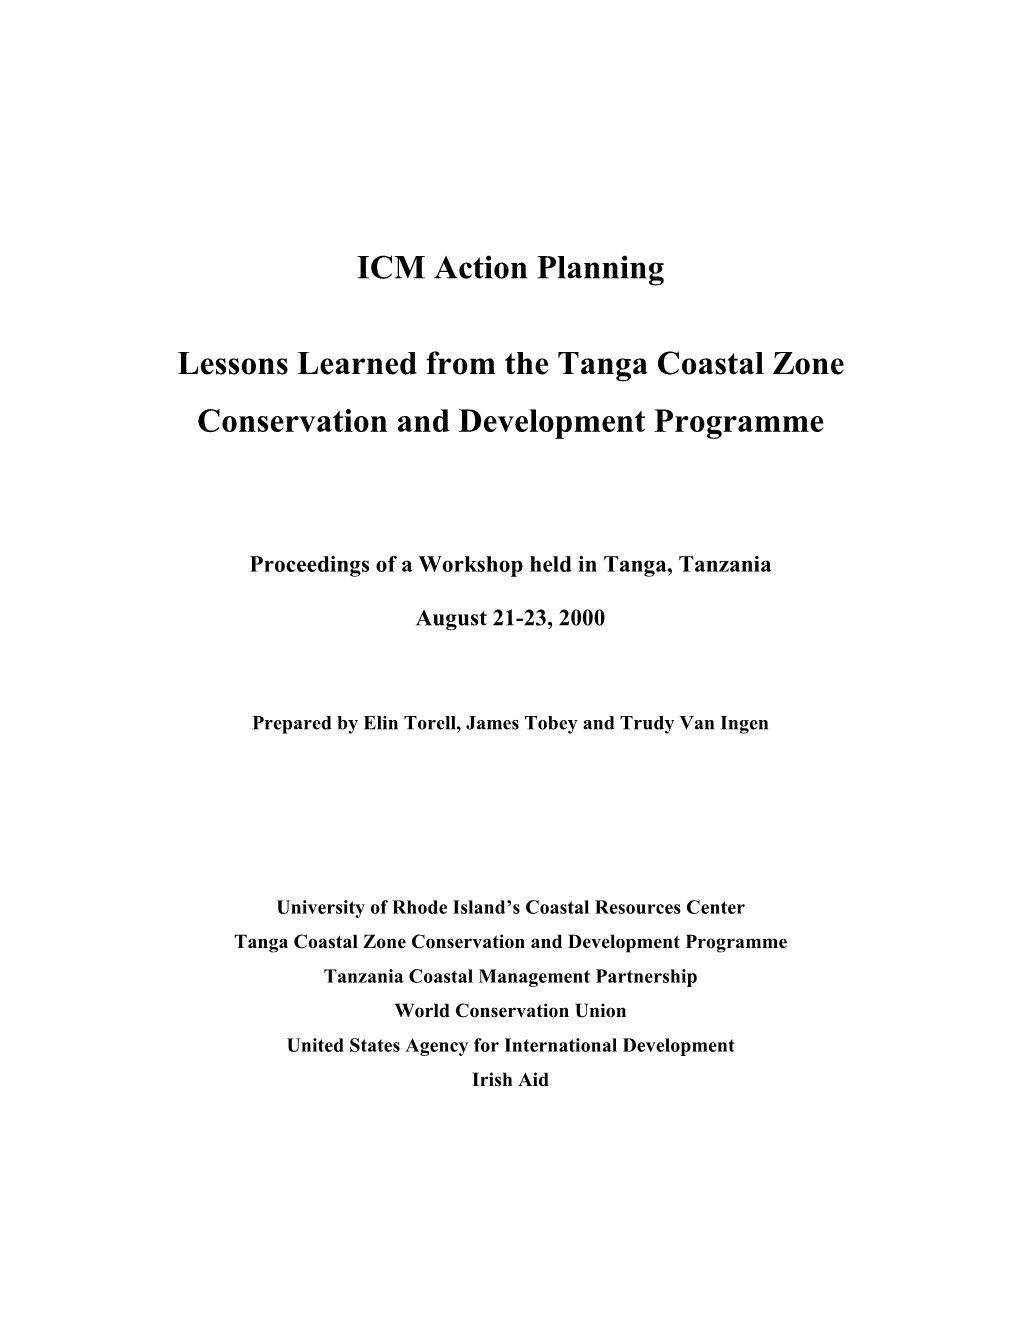 ICM Action Planning Lessons Learned from the Tanga Coastal Zone